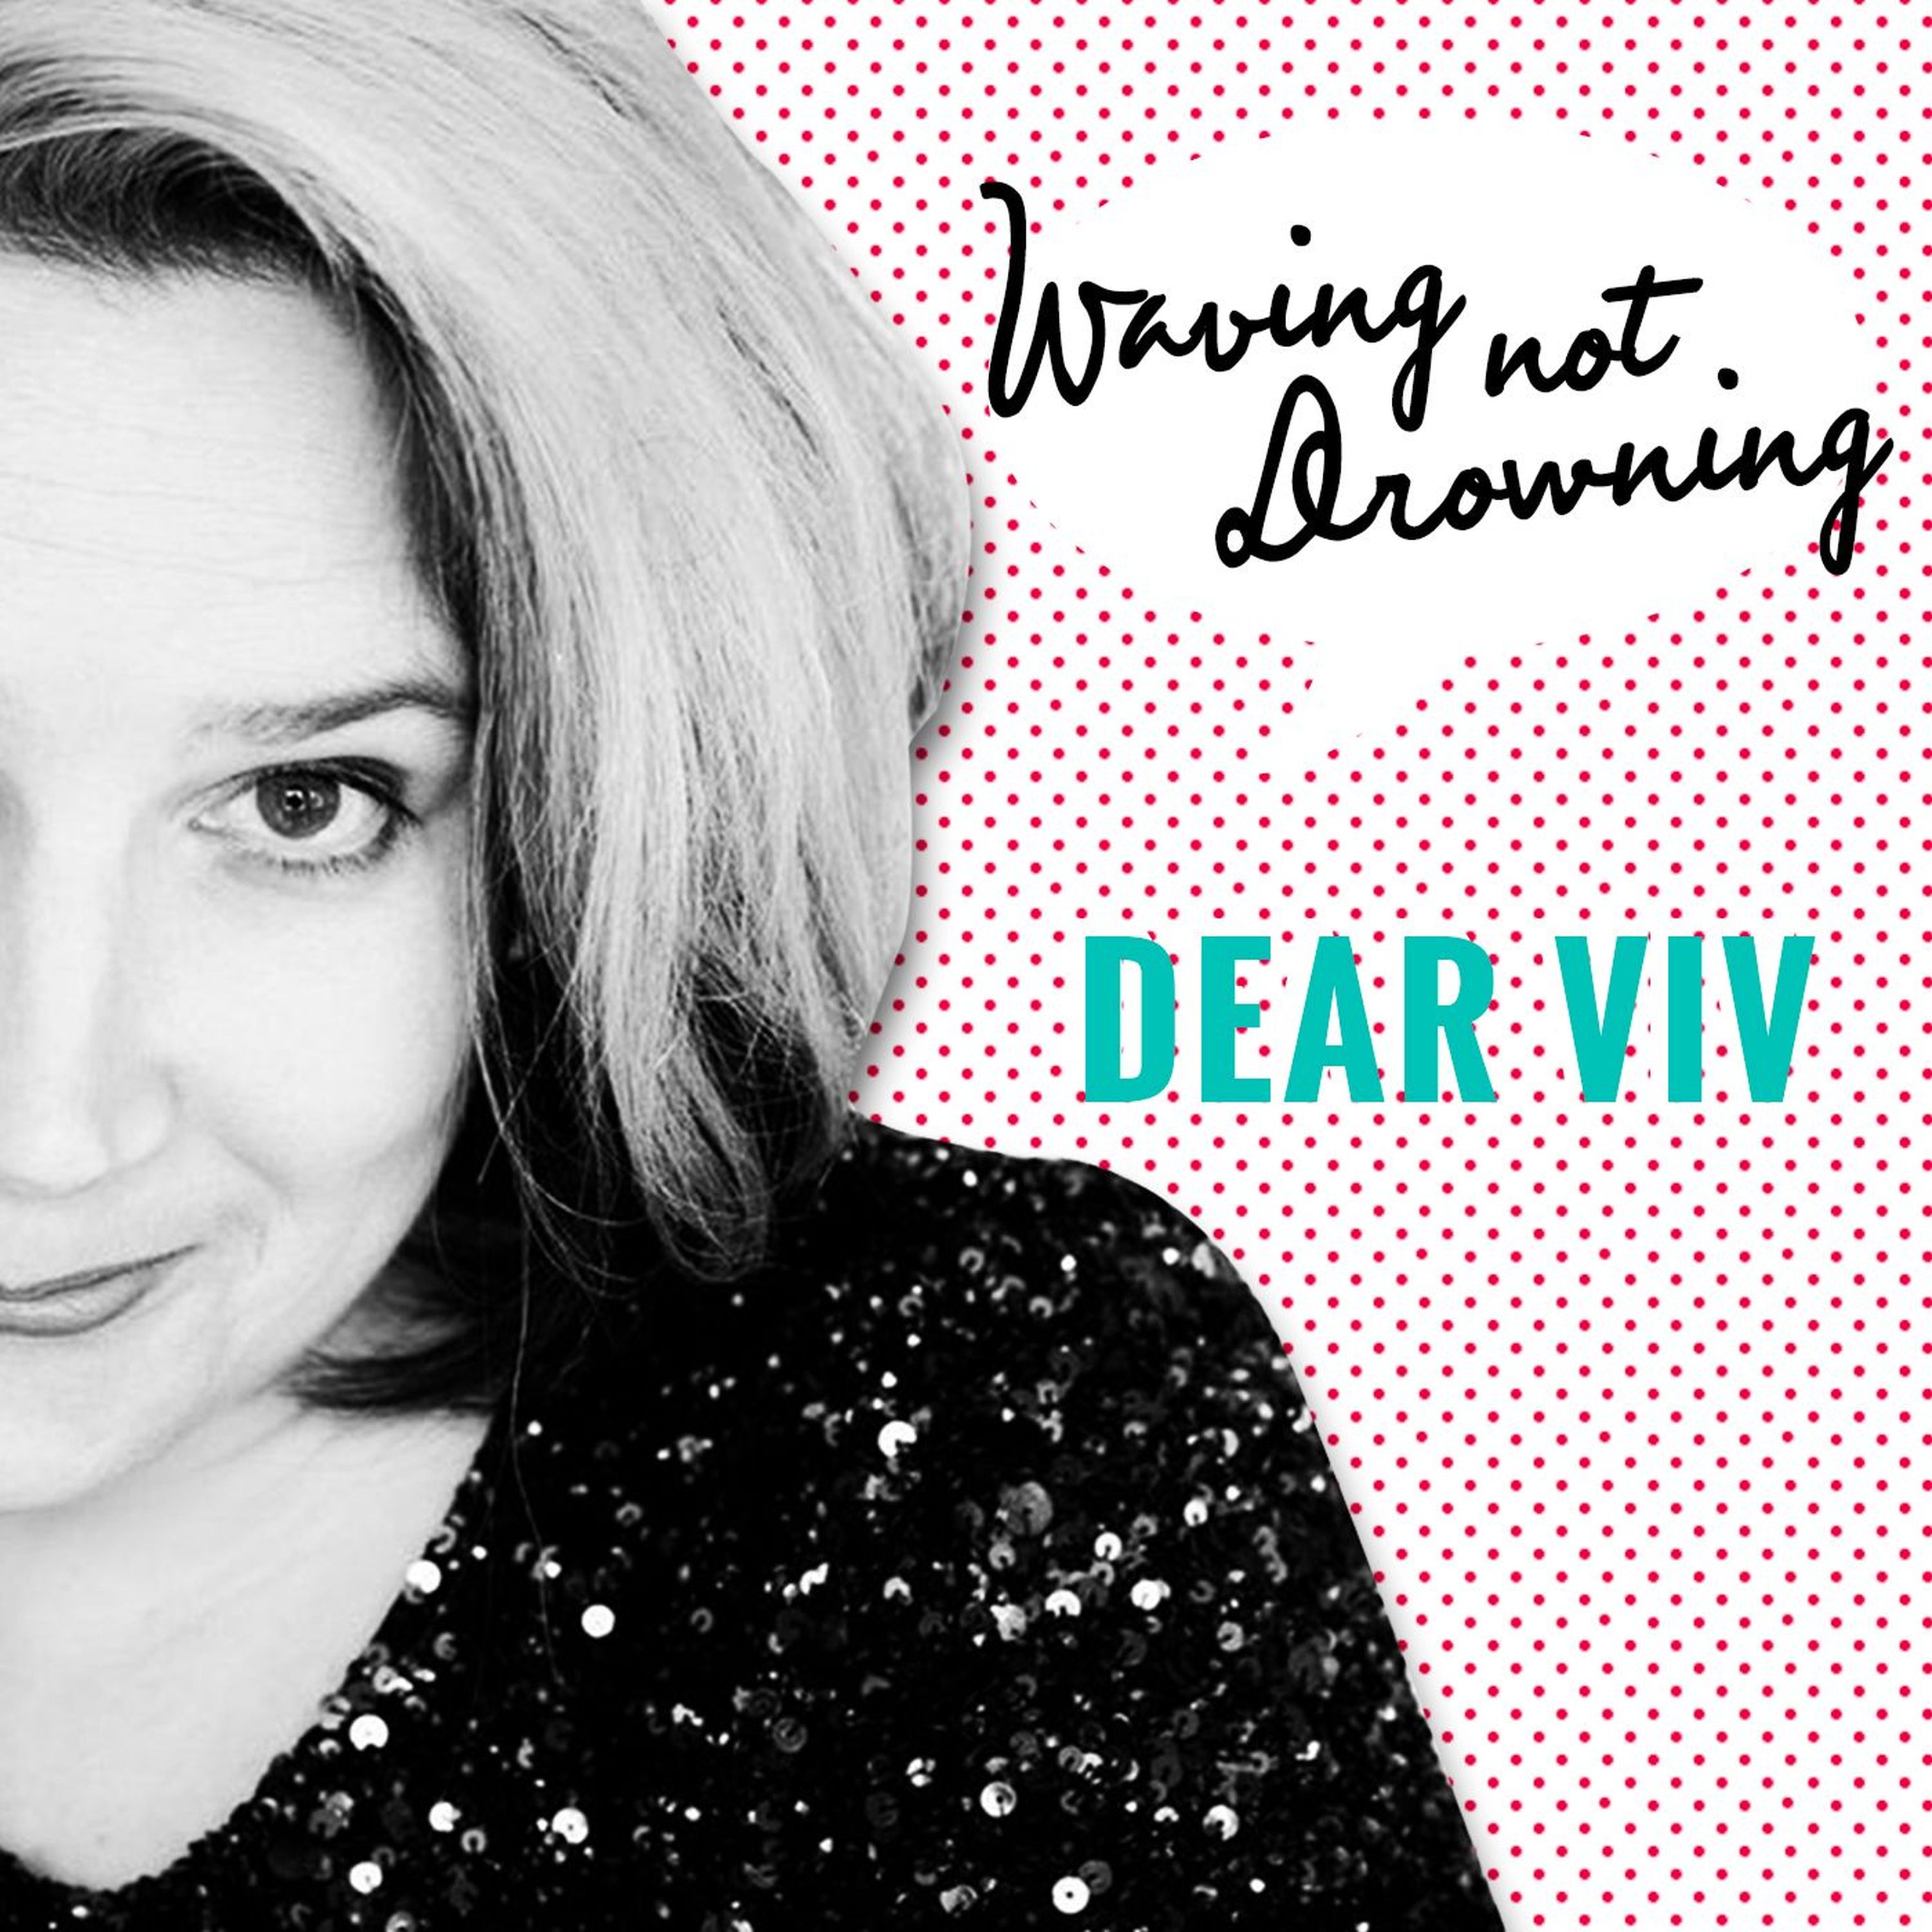 Dear Viv: I need to break up with my boyfriend, but he's in a bad place